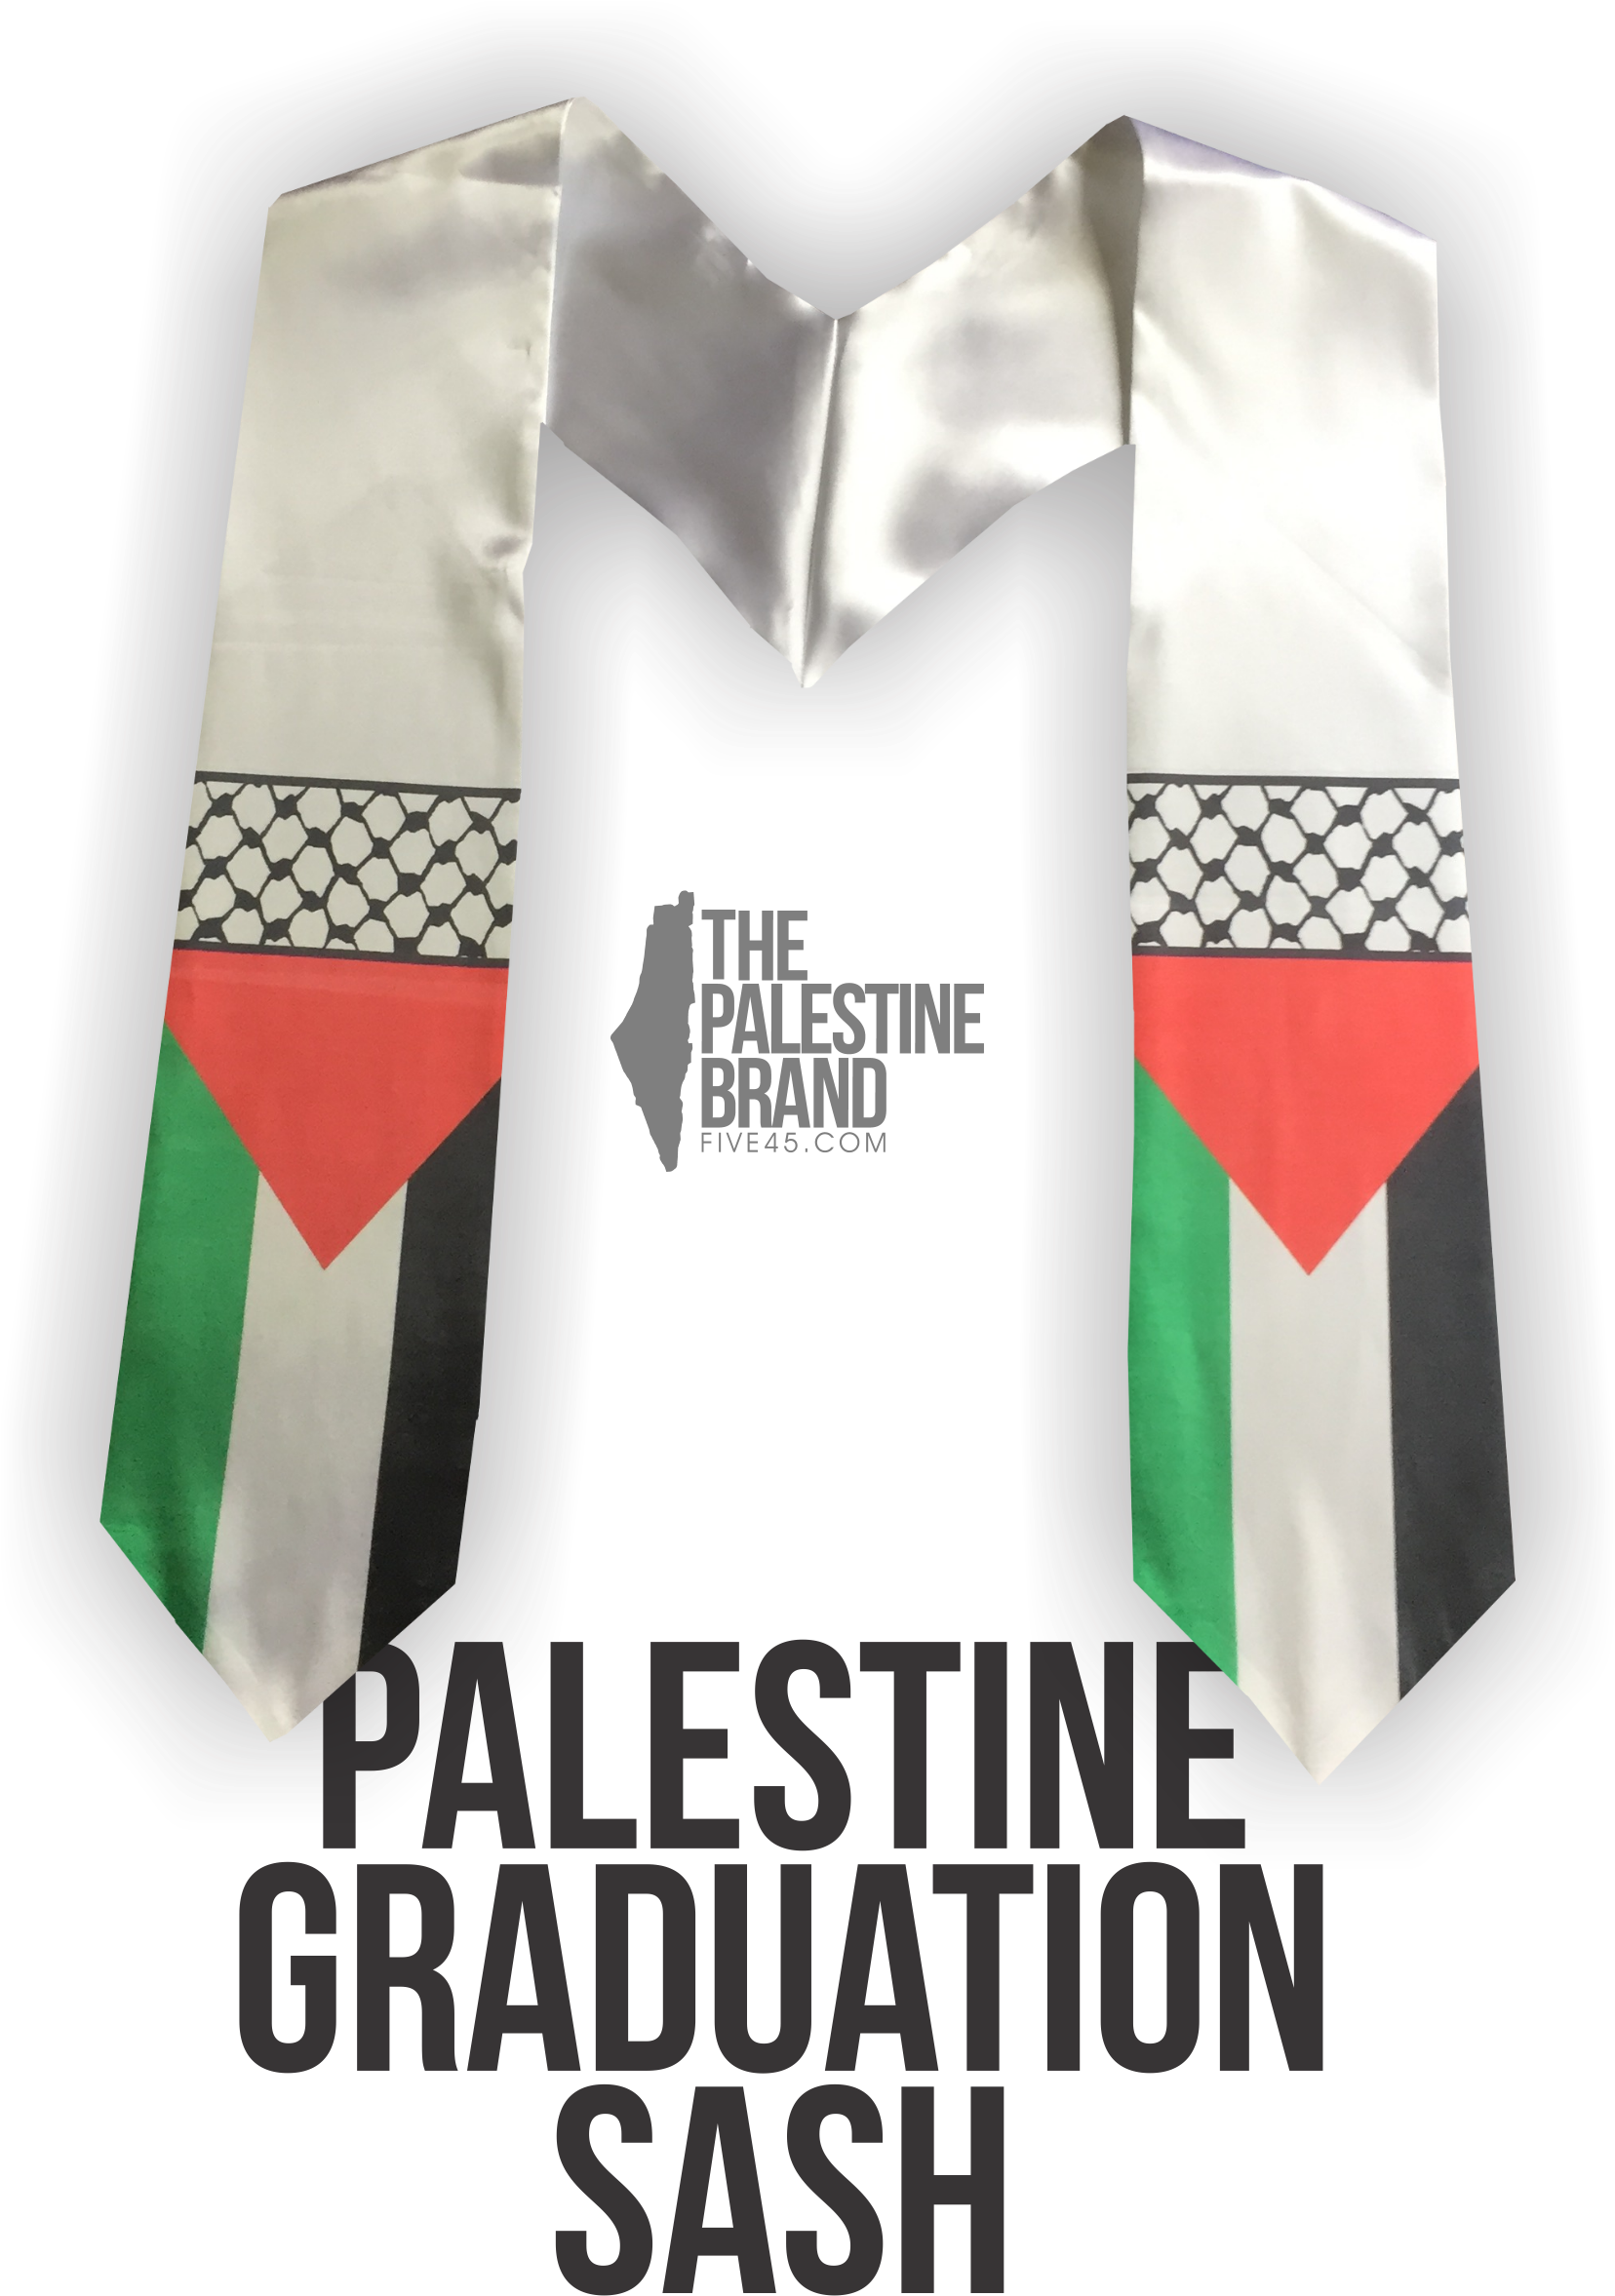  Example of a Palestine graduation stole available in the US. 